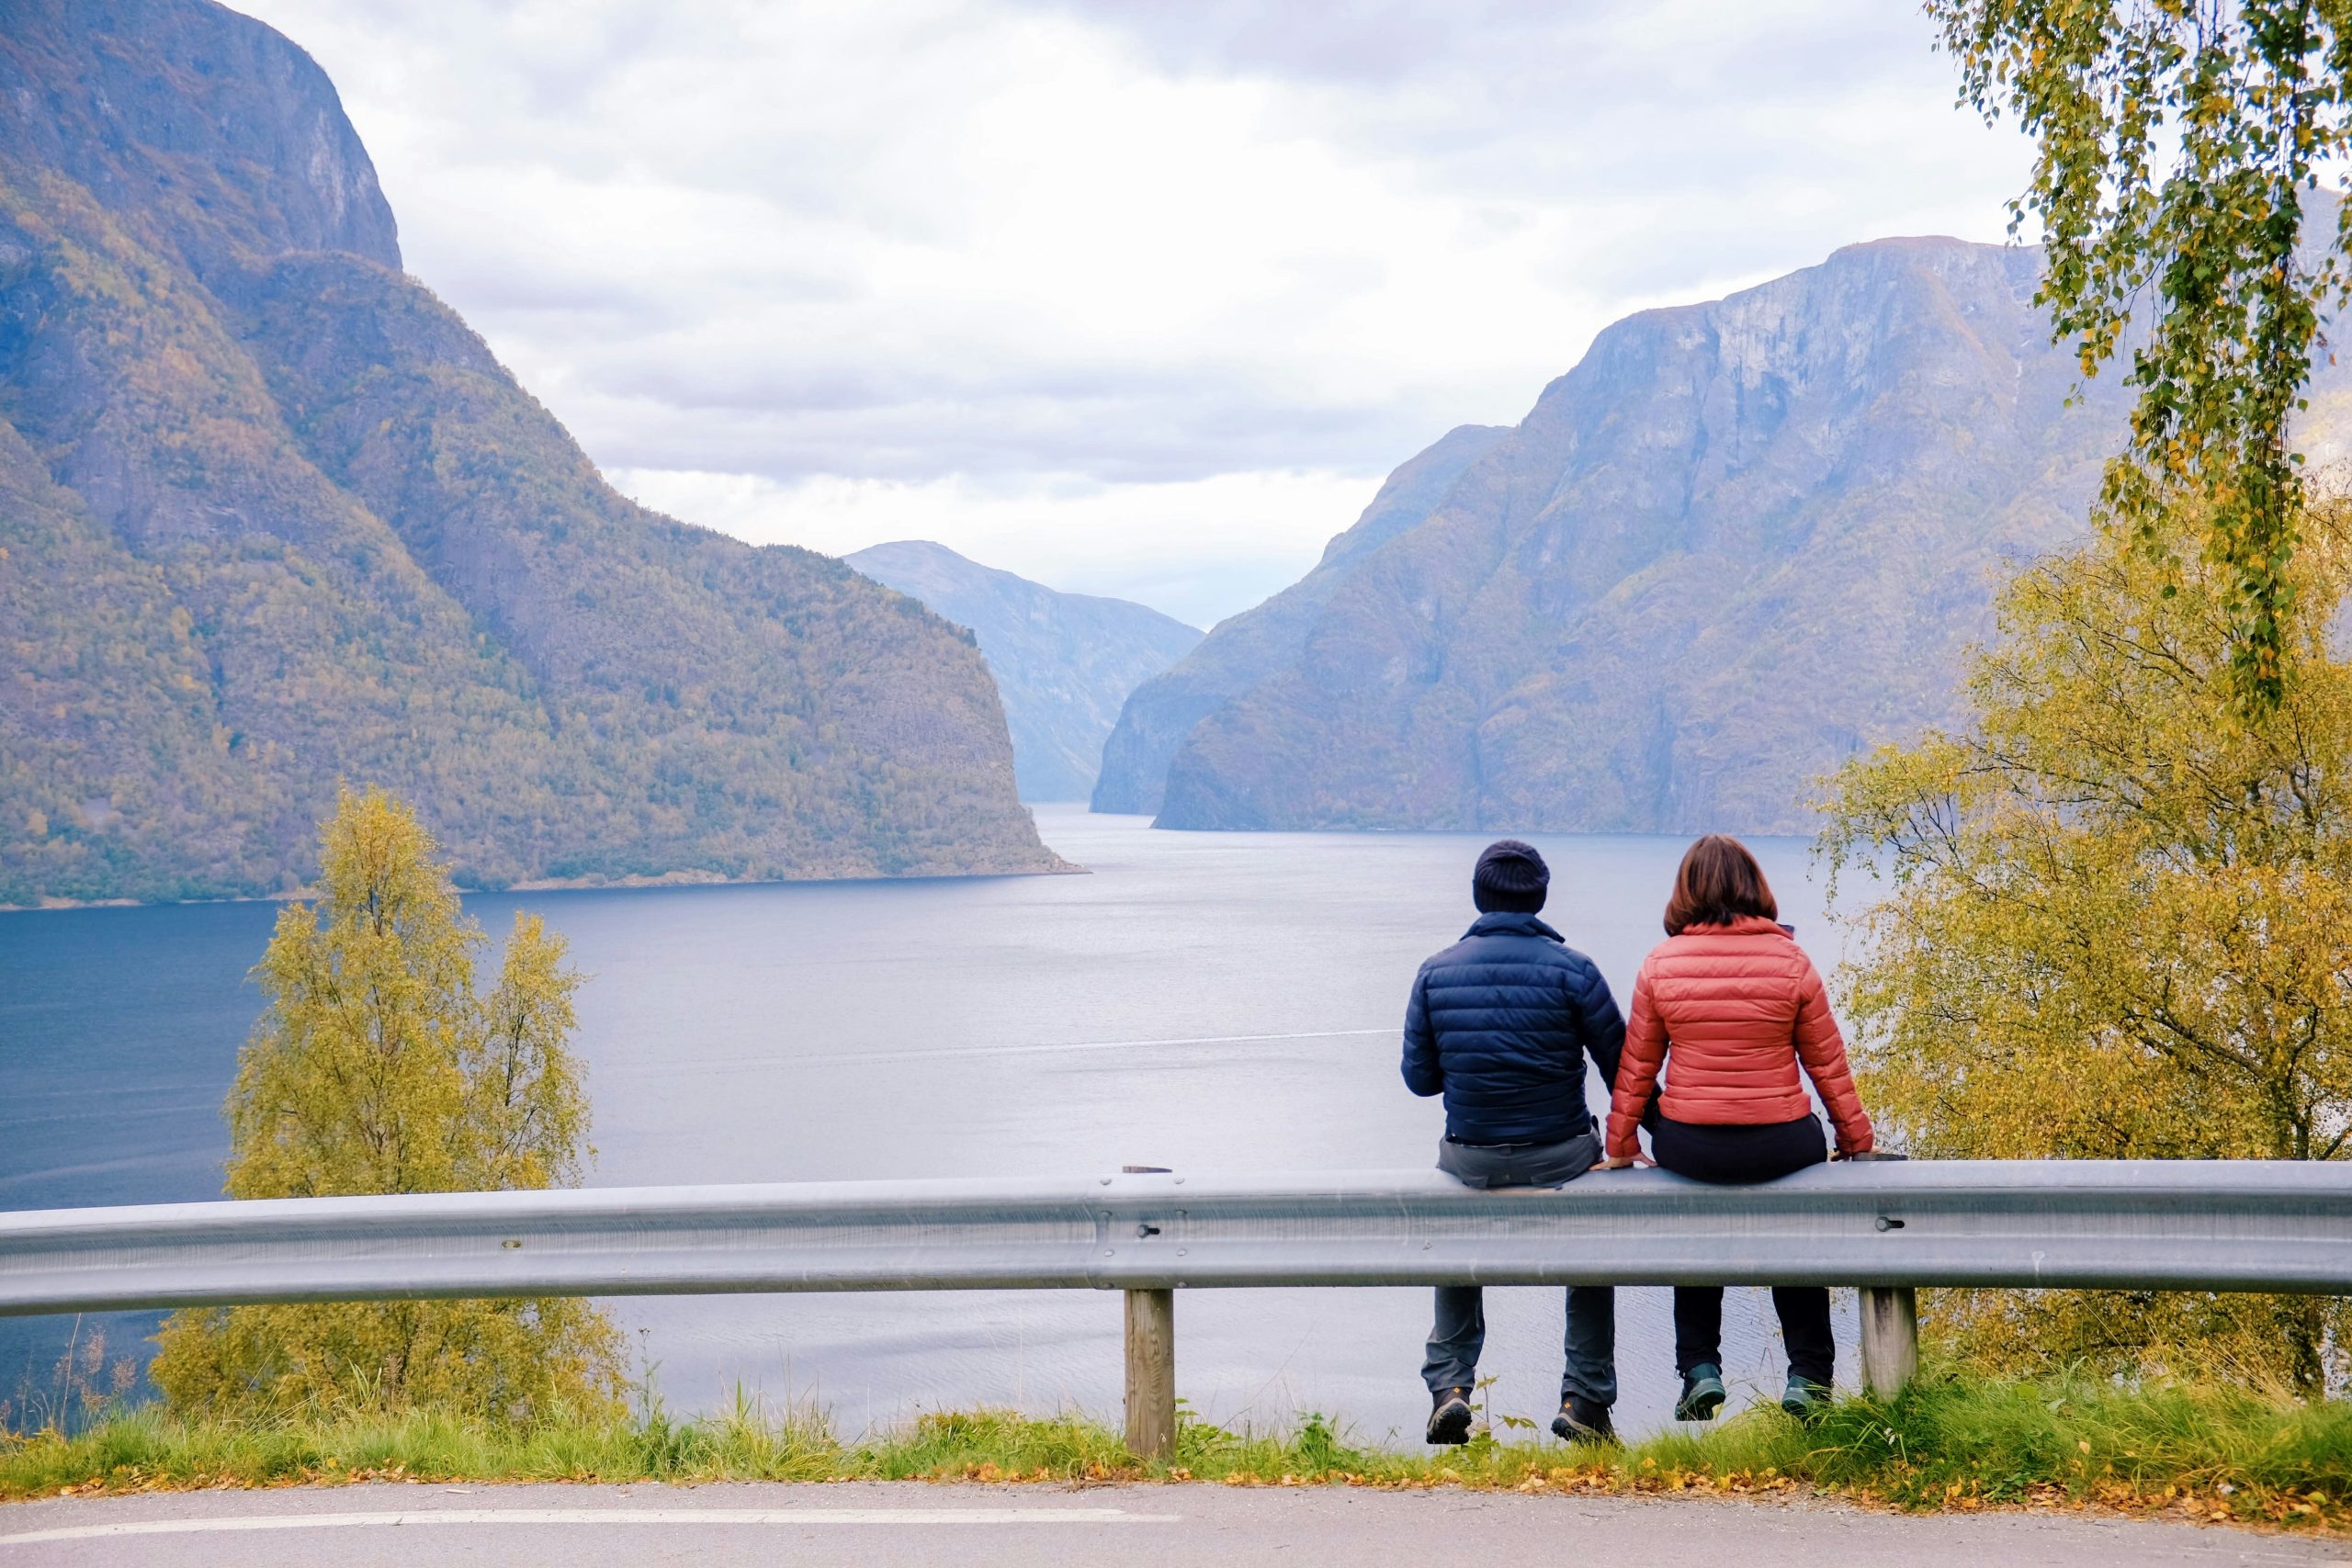 explore the breathtaking beauty of fjords with our fjord travel packages. discover stunning landscapes, serene waters, and unforgettable experiences on your fjord adventure.